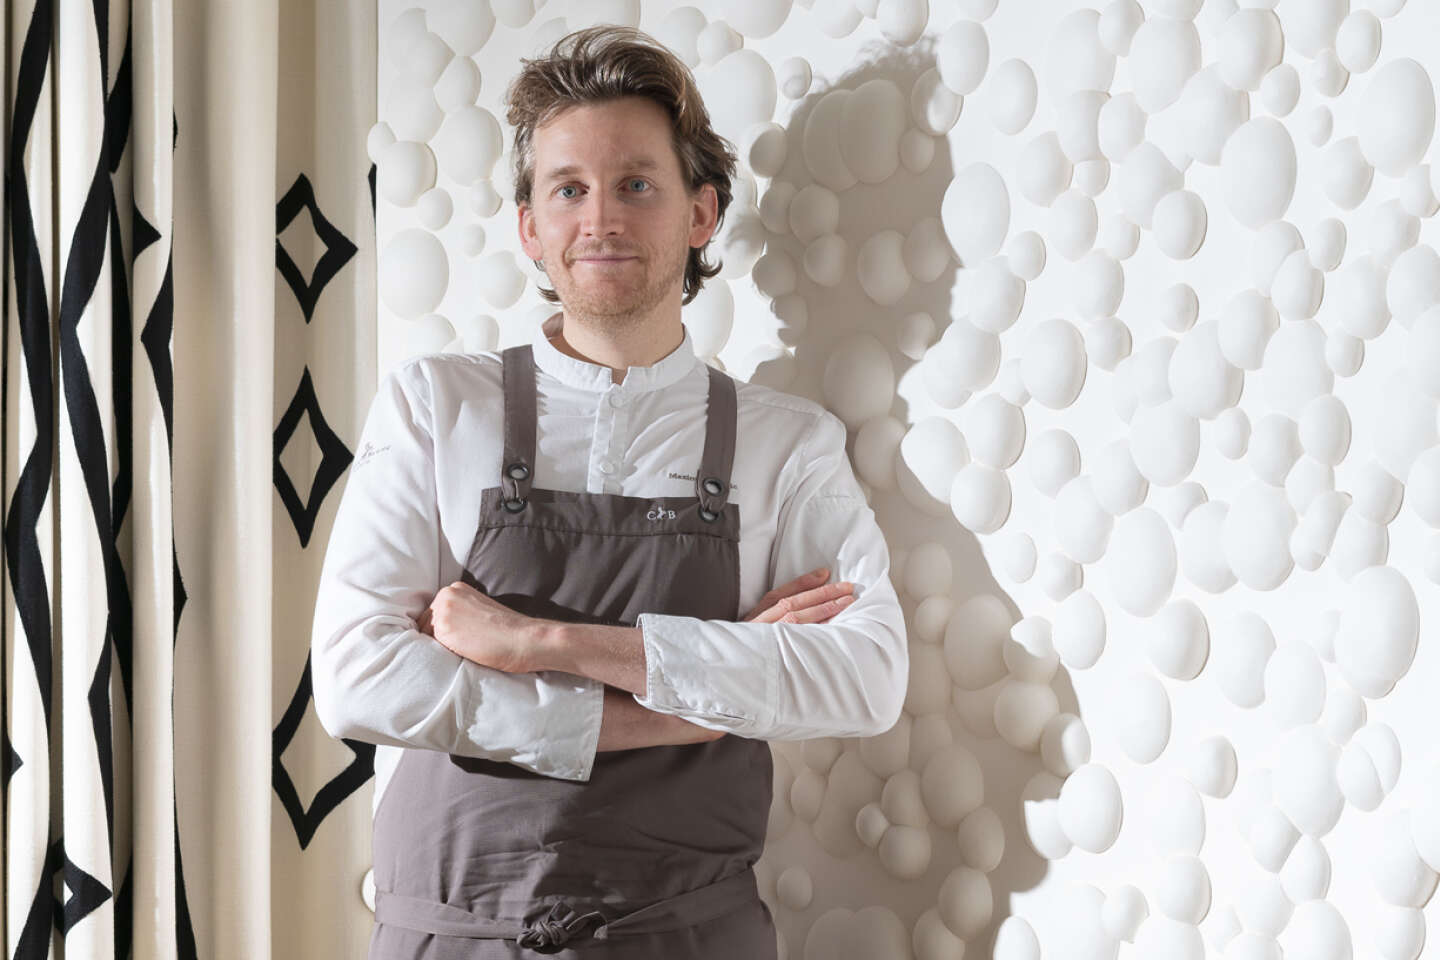 Maxime Frédéric, an exceptional pastry chef